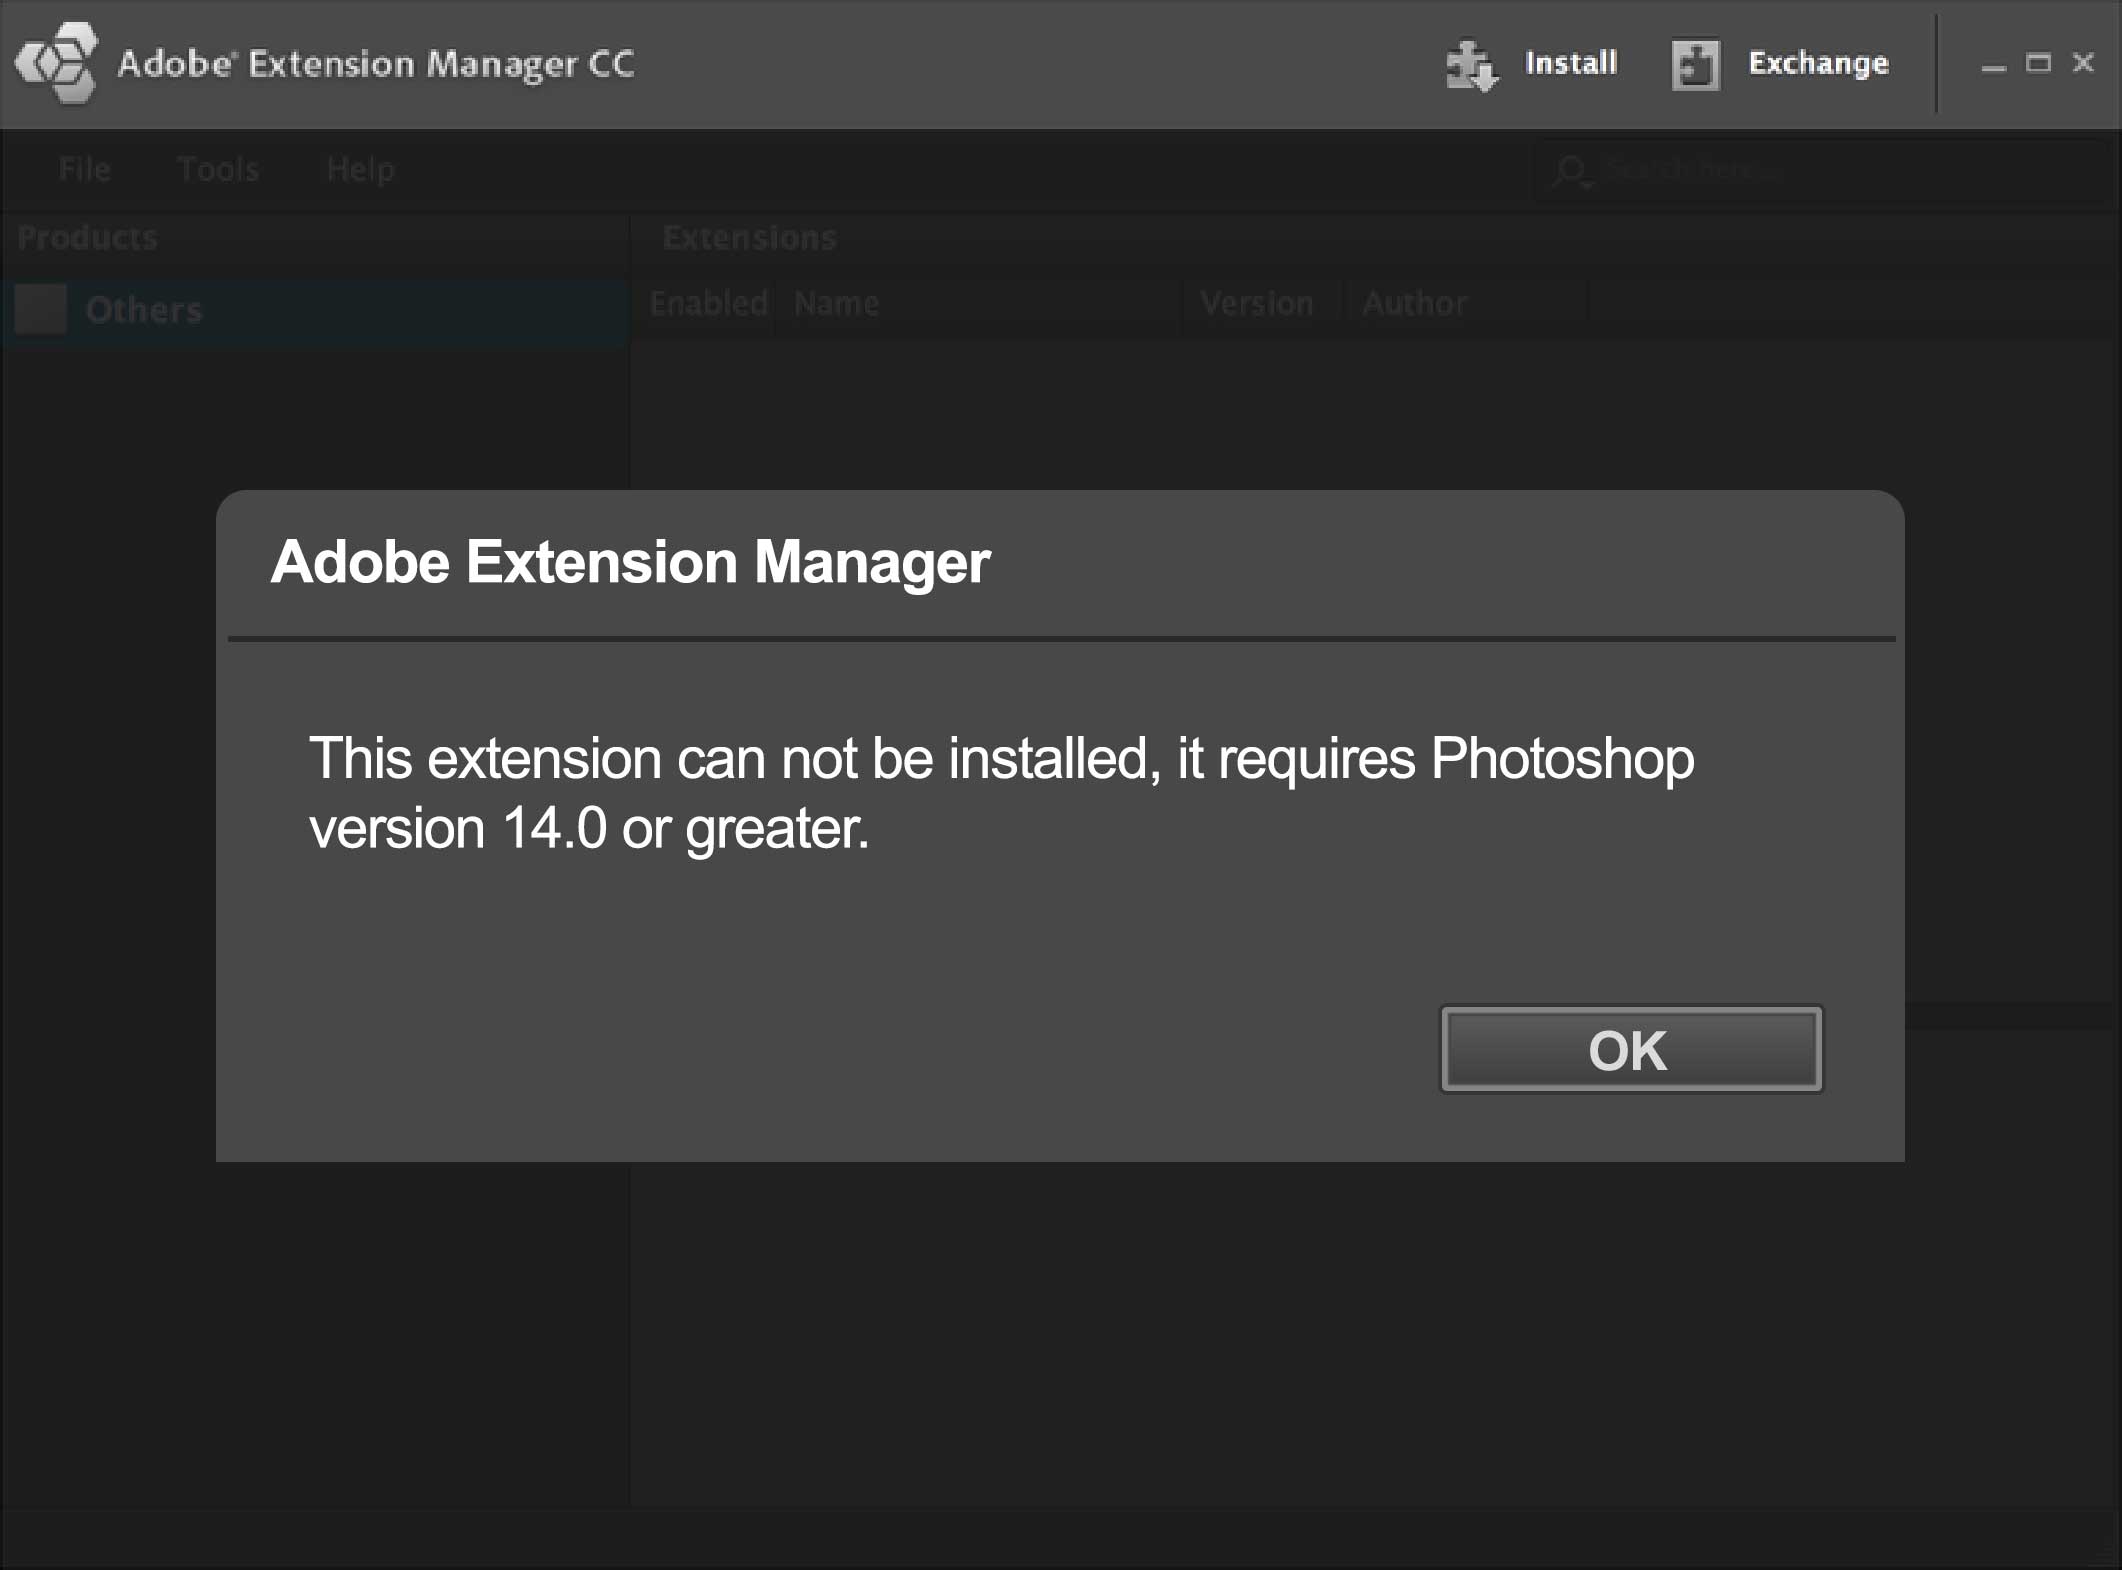 Extension Manager CC claims extension requires Photoshop 14 or greater